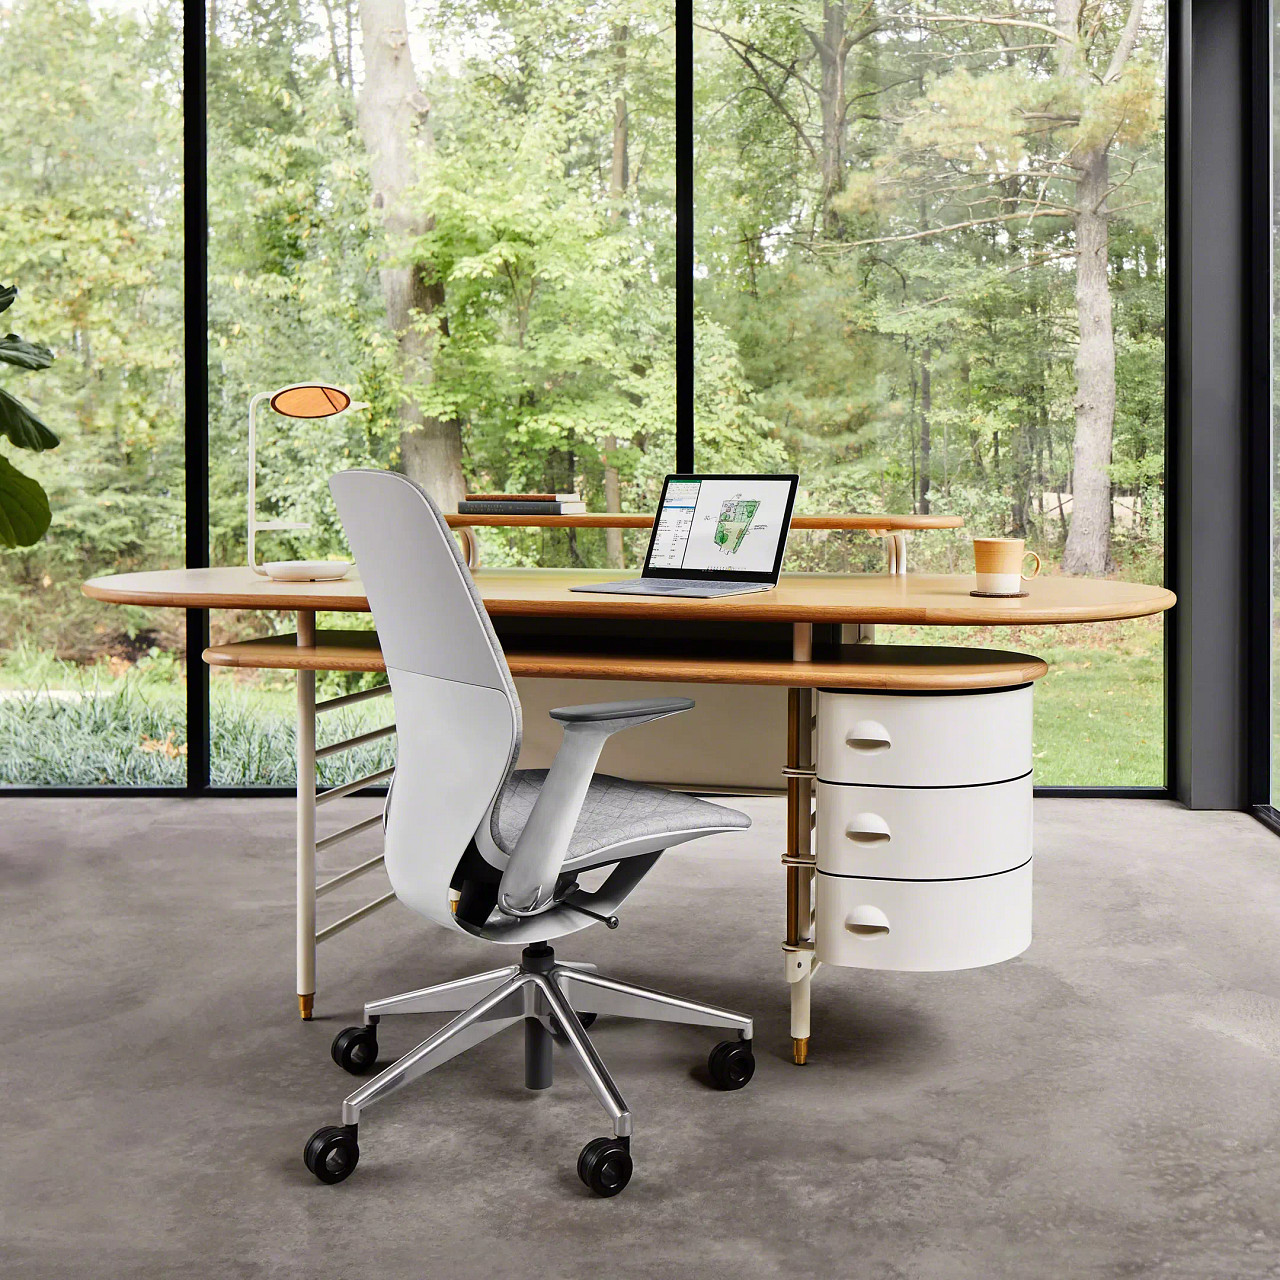 Frank Lloyd Wright steelcase furniture for the office in white